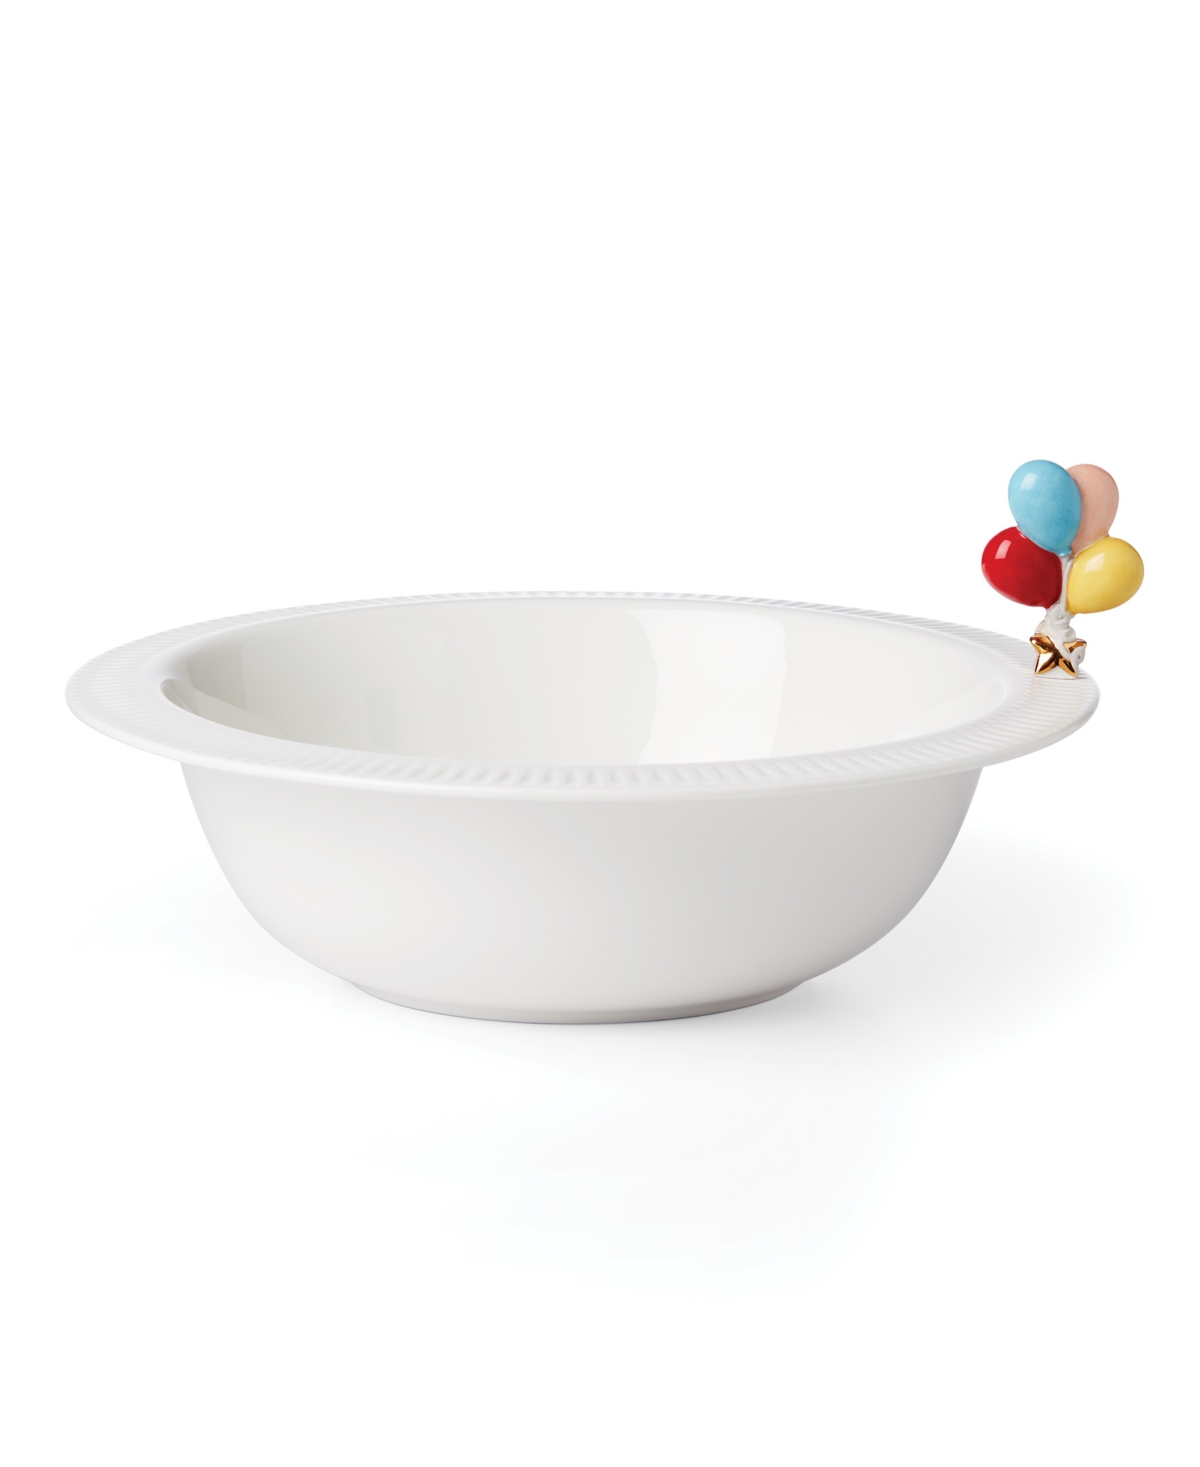 Lenox Profile Charm Serving Bowl With Balloons Popper In White